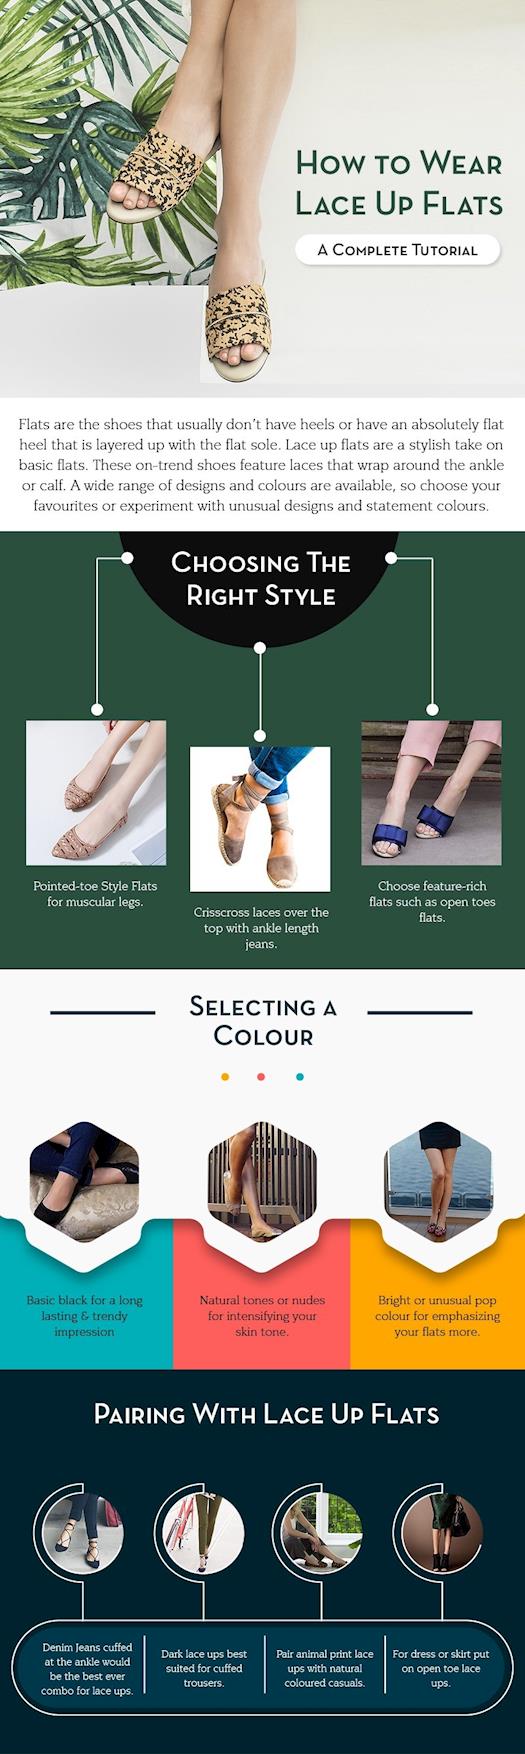 How To Wear Lace Up Flats